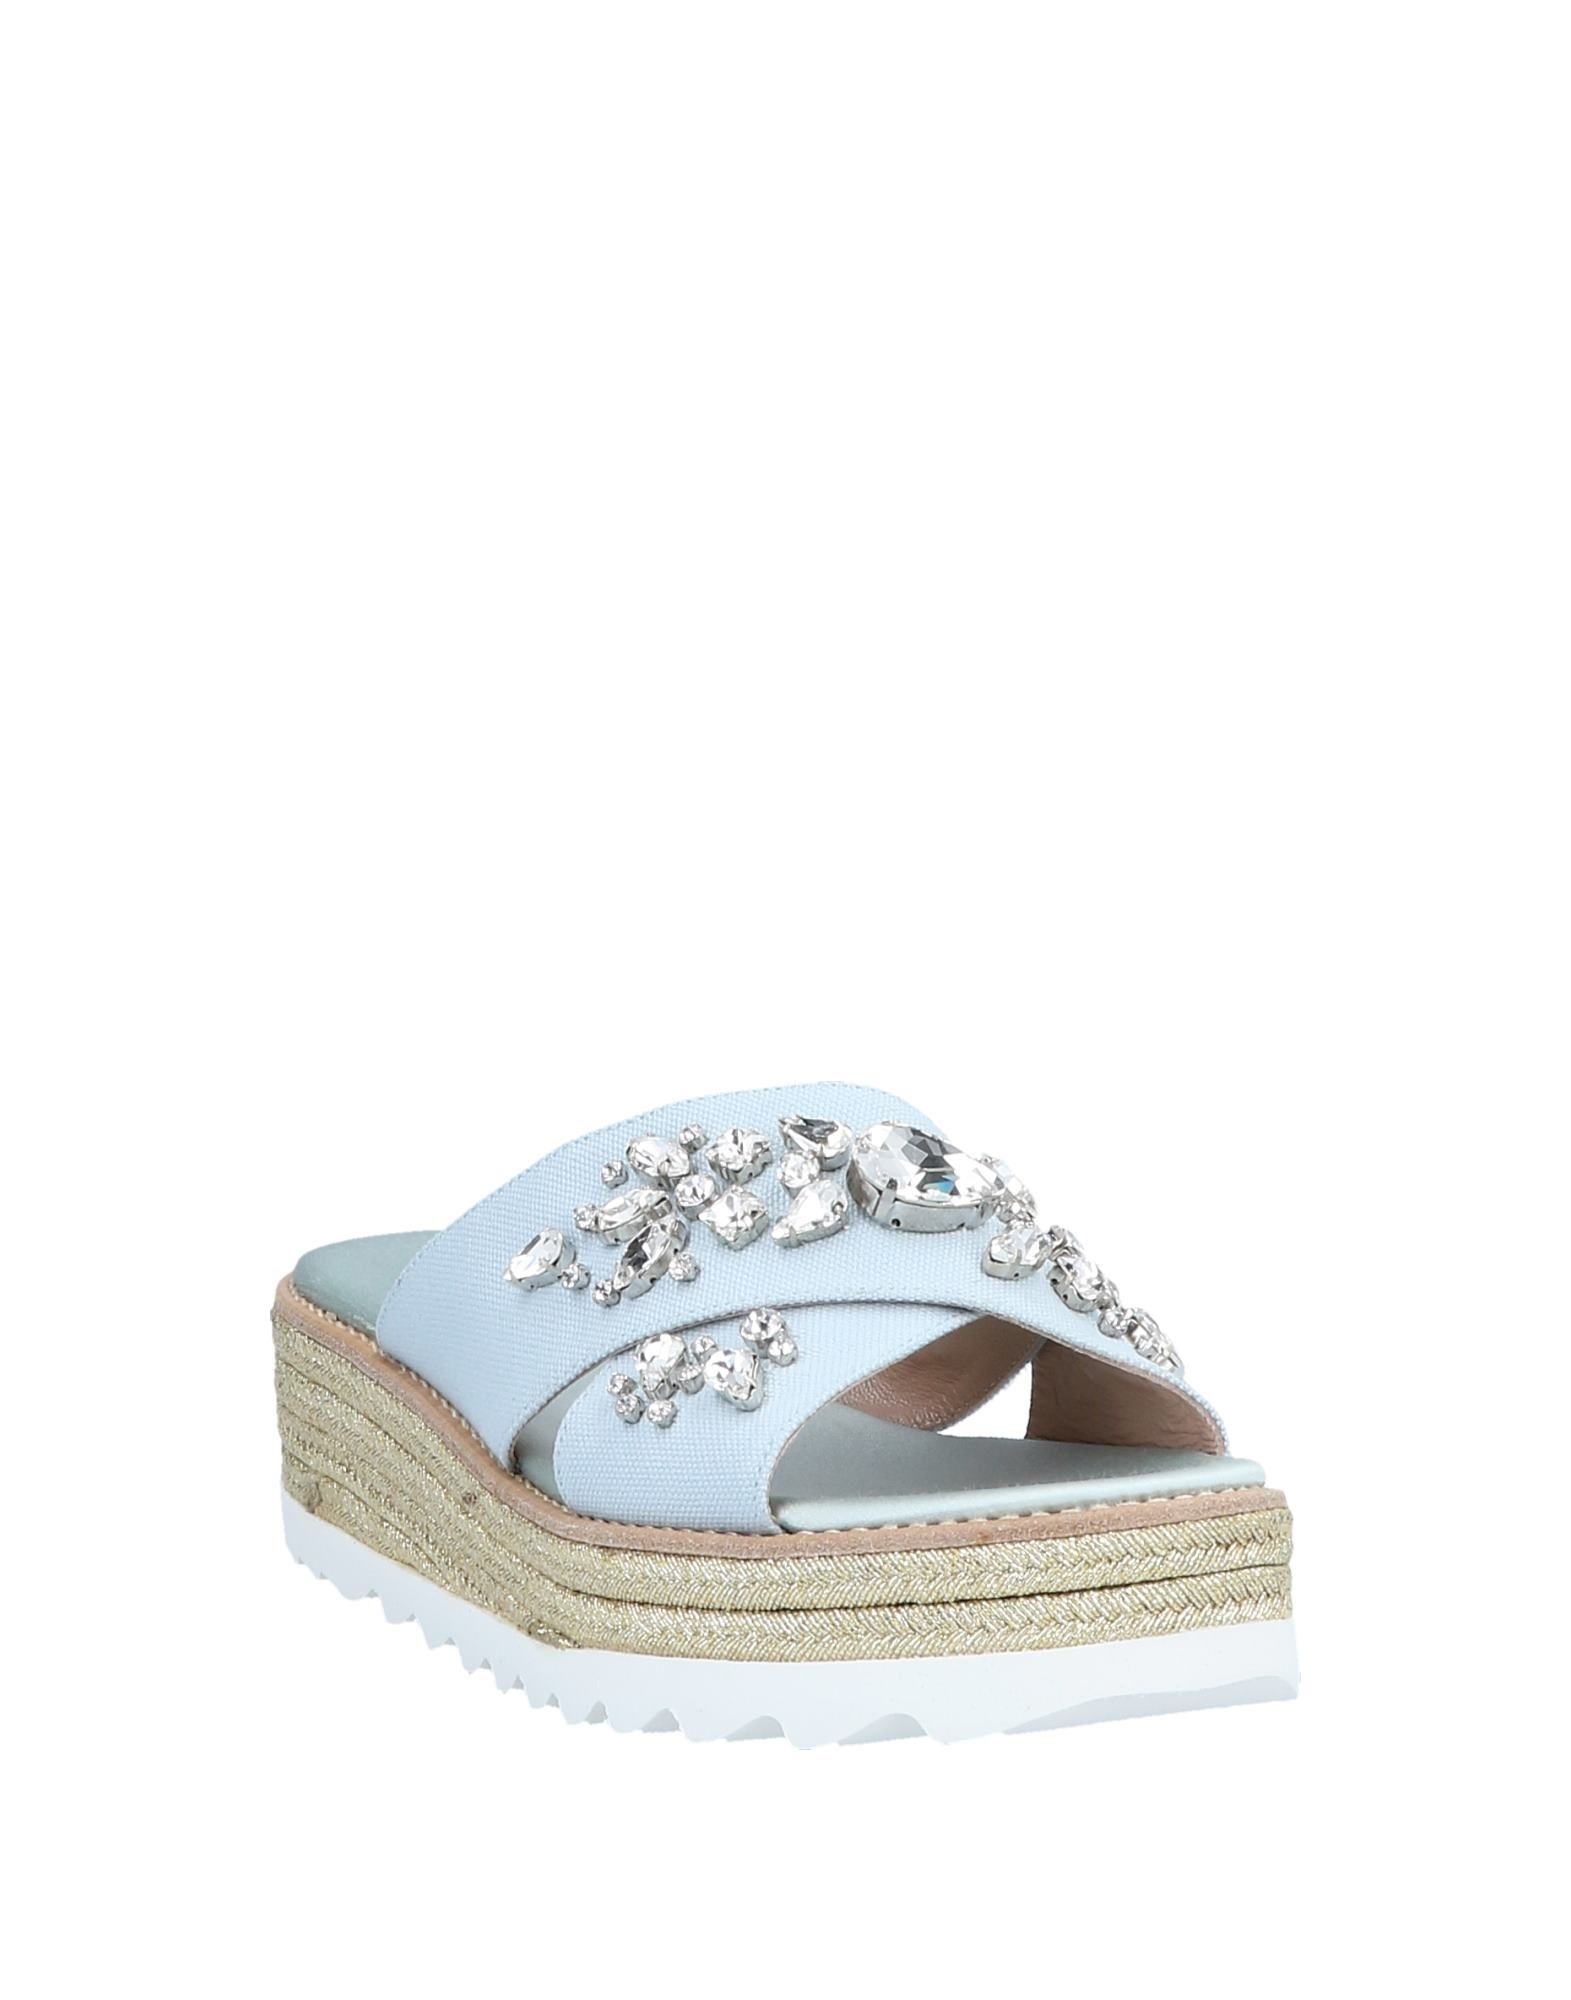 canvas, rhinestones, solid colour, round toeline, wedge heel, rope wedge, leather lining, rubber sole, contains non-textile parts of animal origin